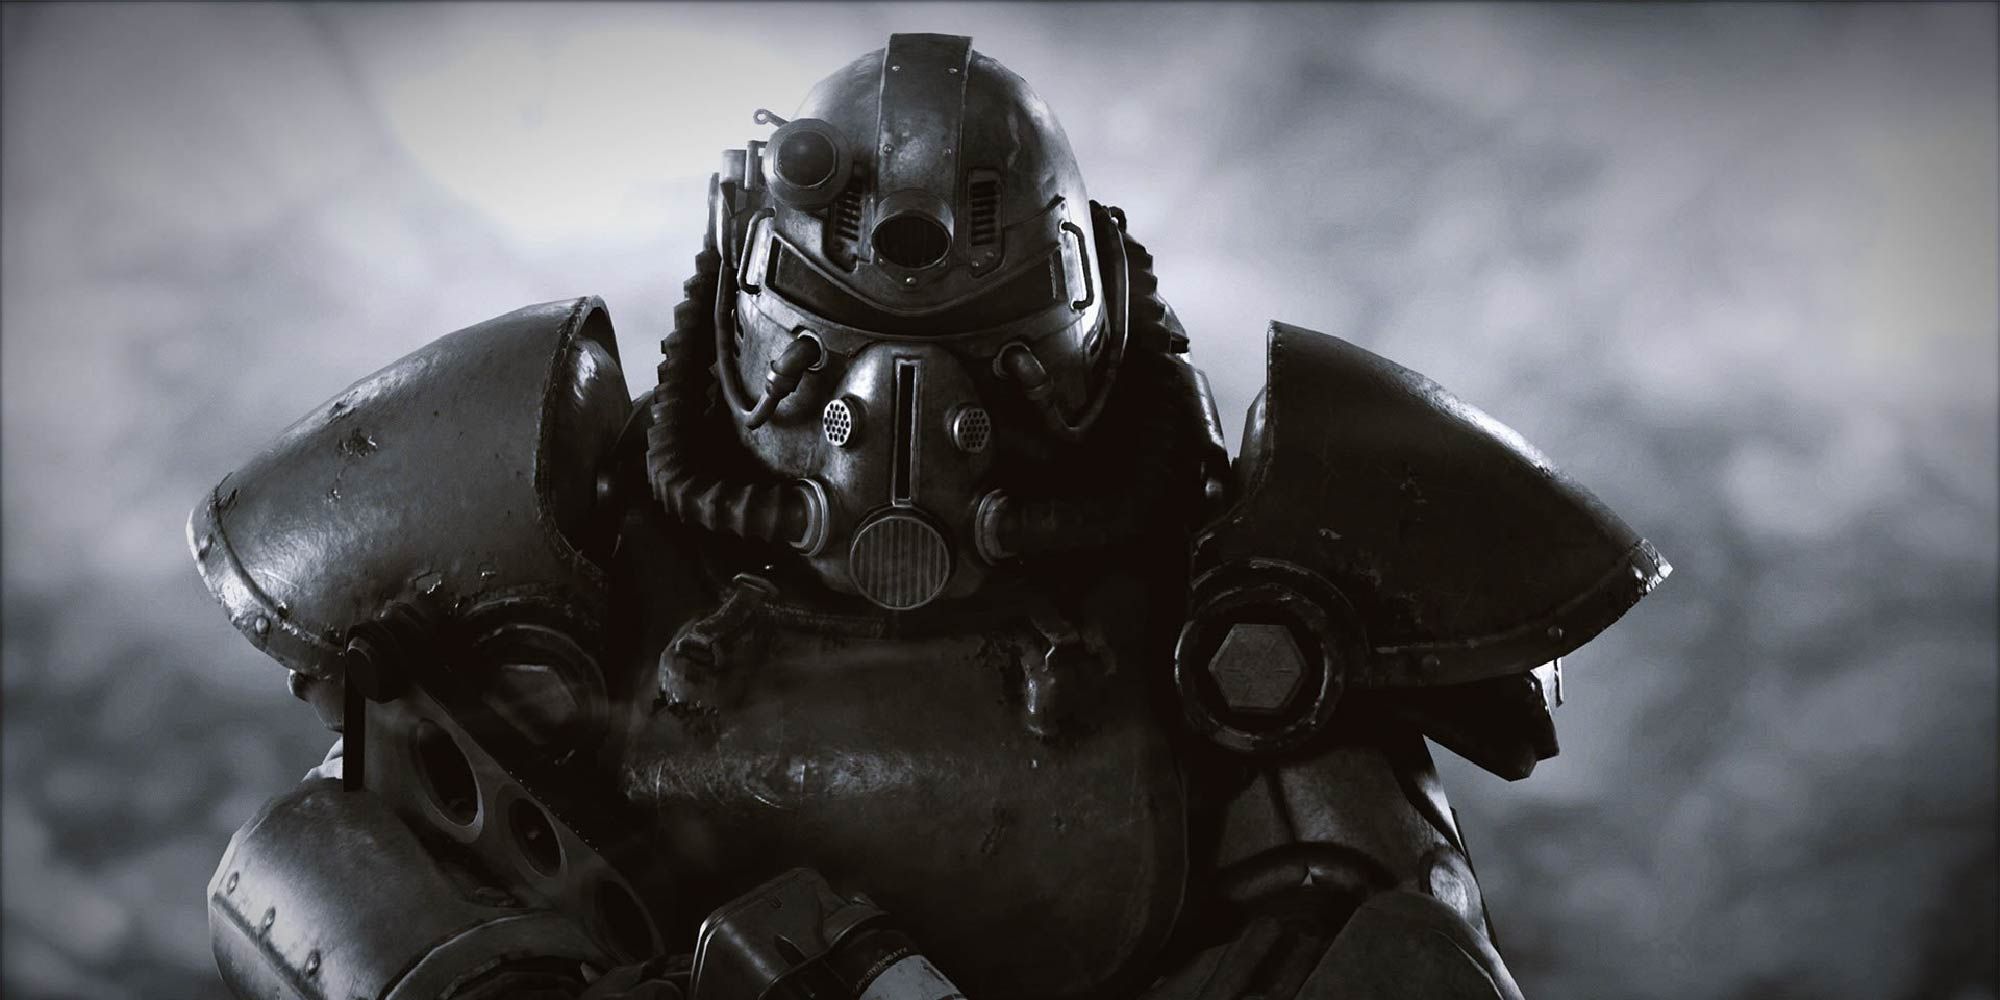 A soldier in T-51 power armor.